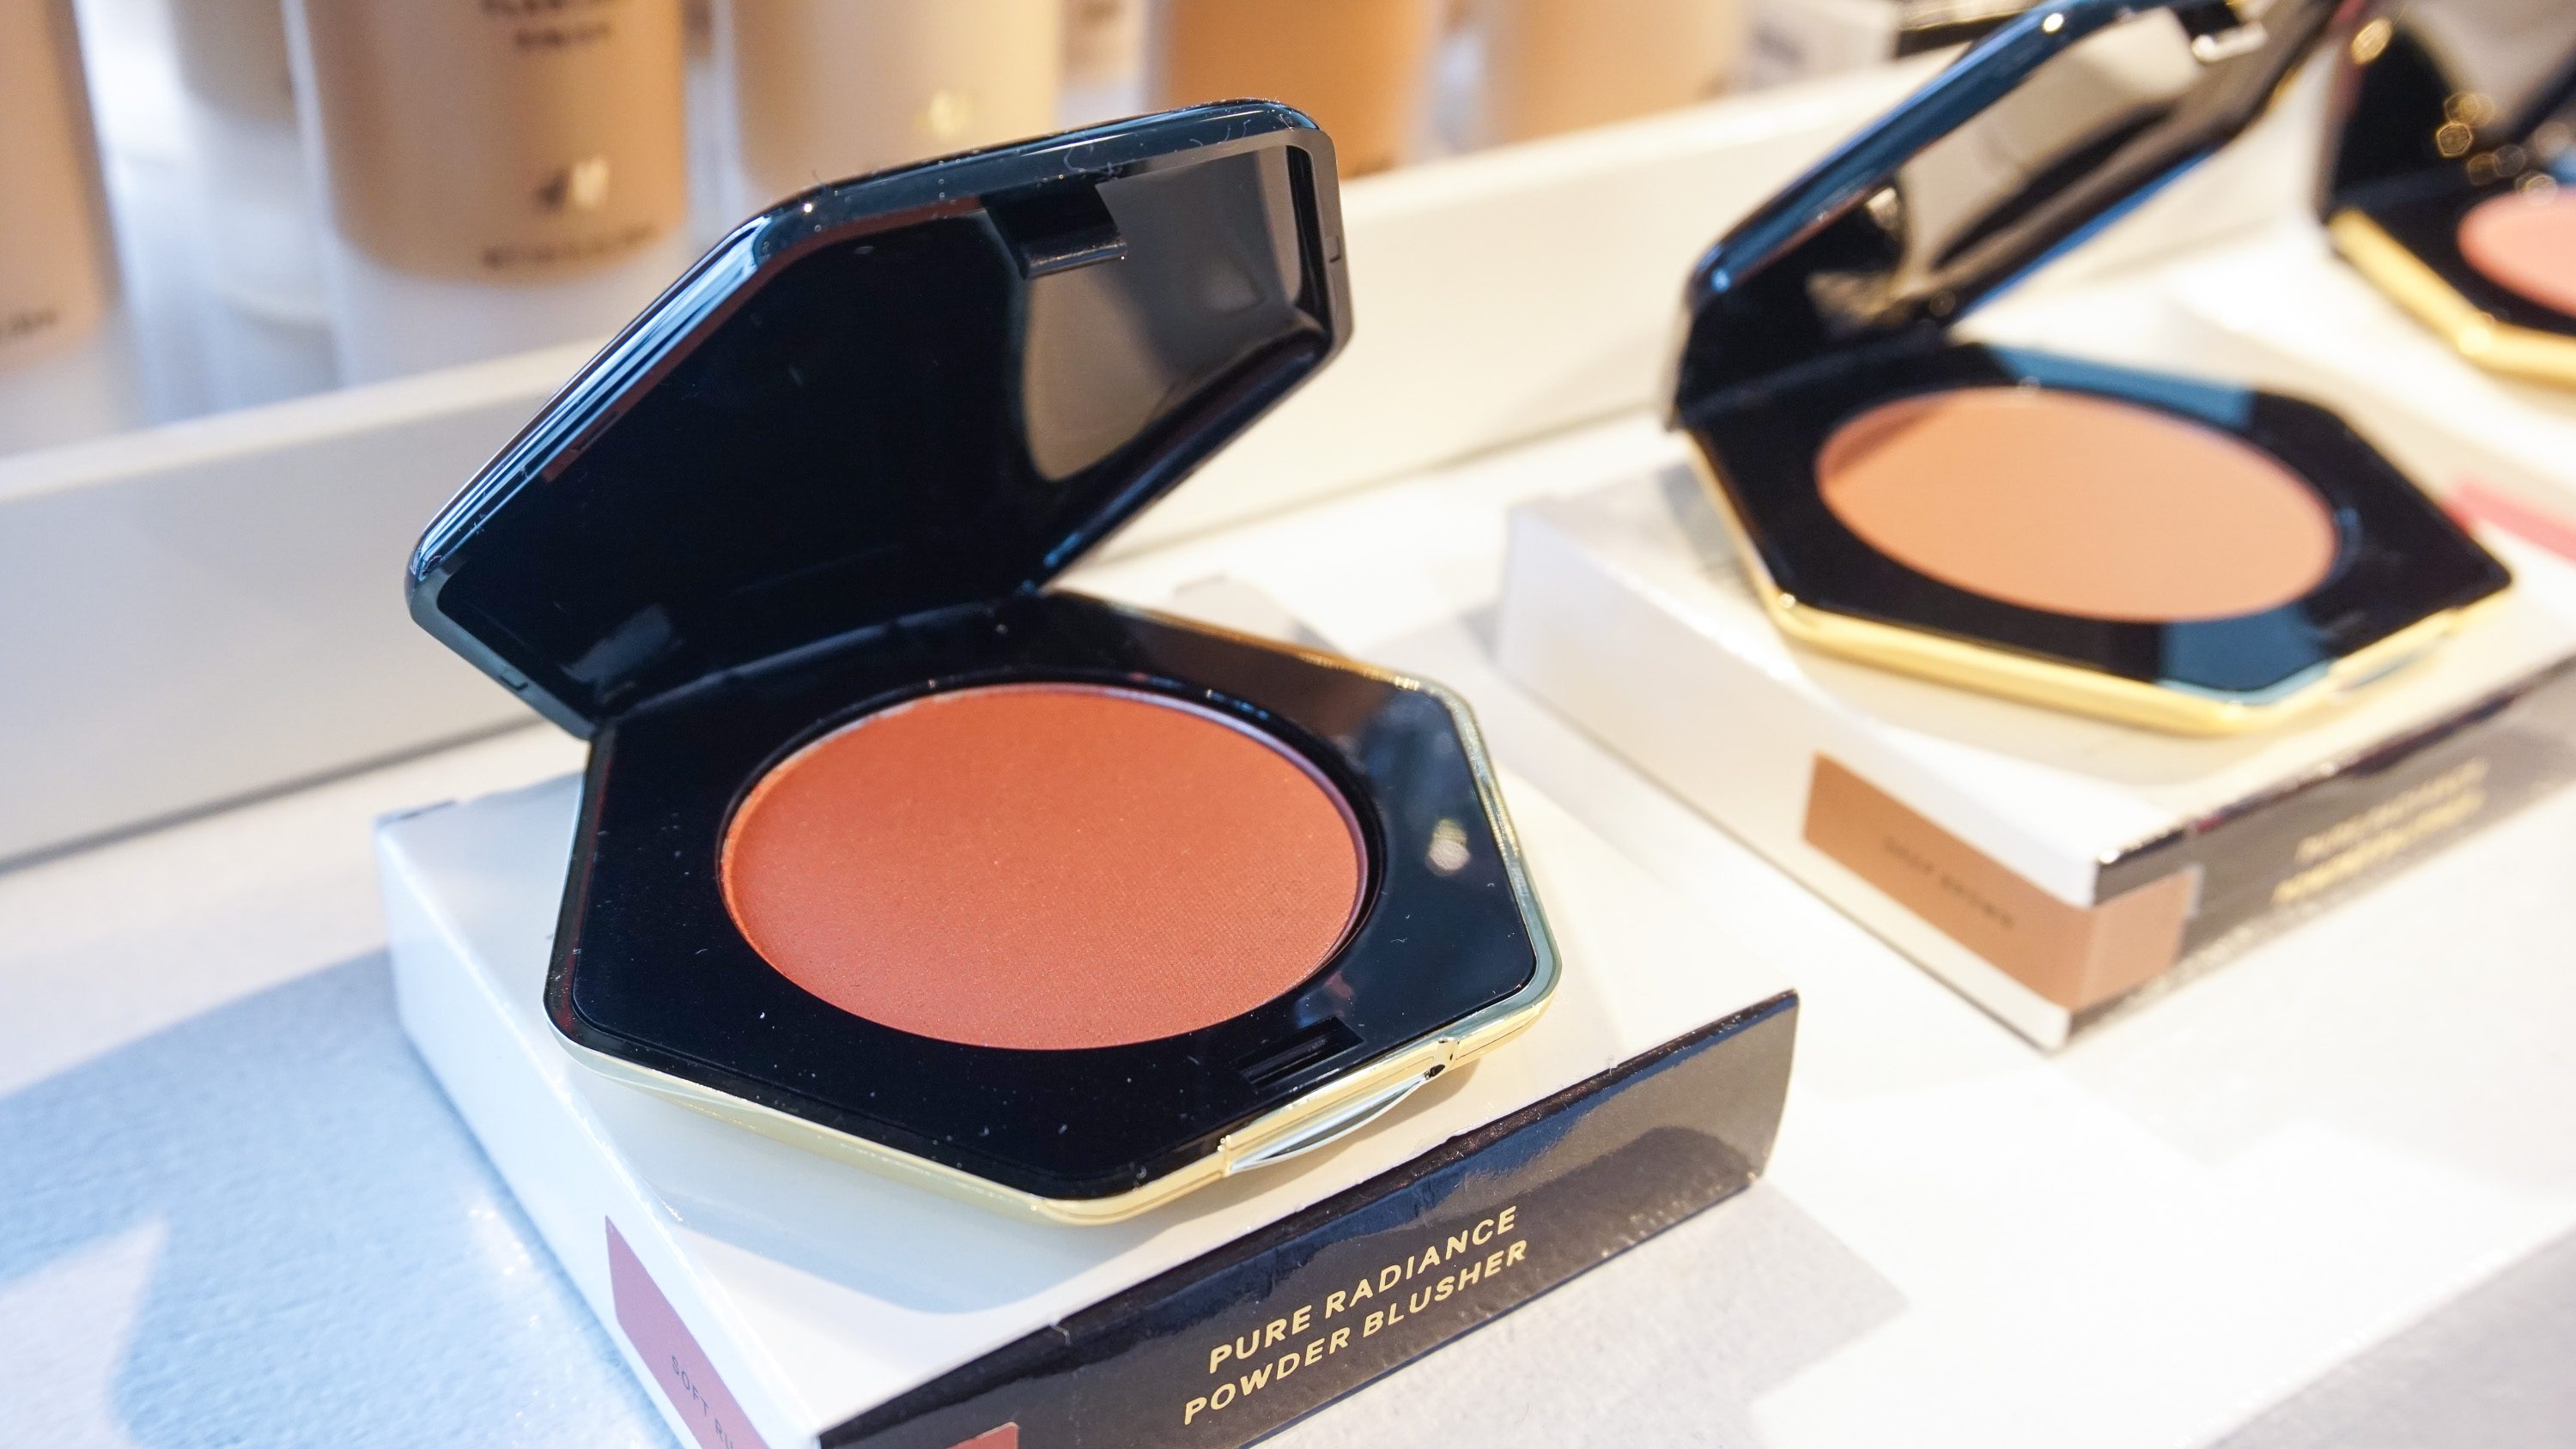 Pure Radiance Powder Blusher in Soft Russet (L) and Deep Brown (R) (P799)  